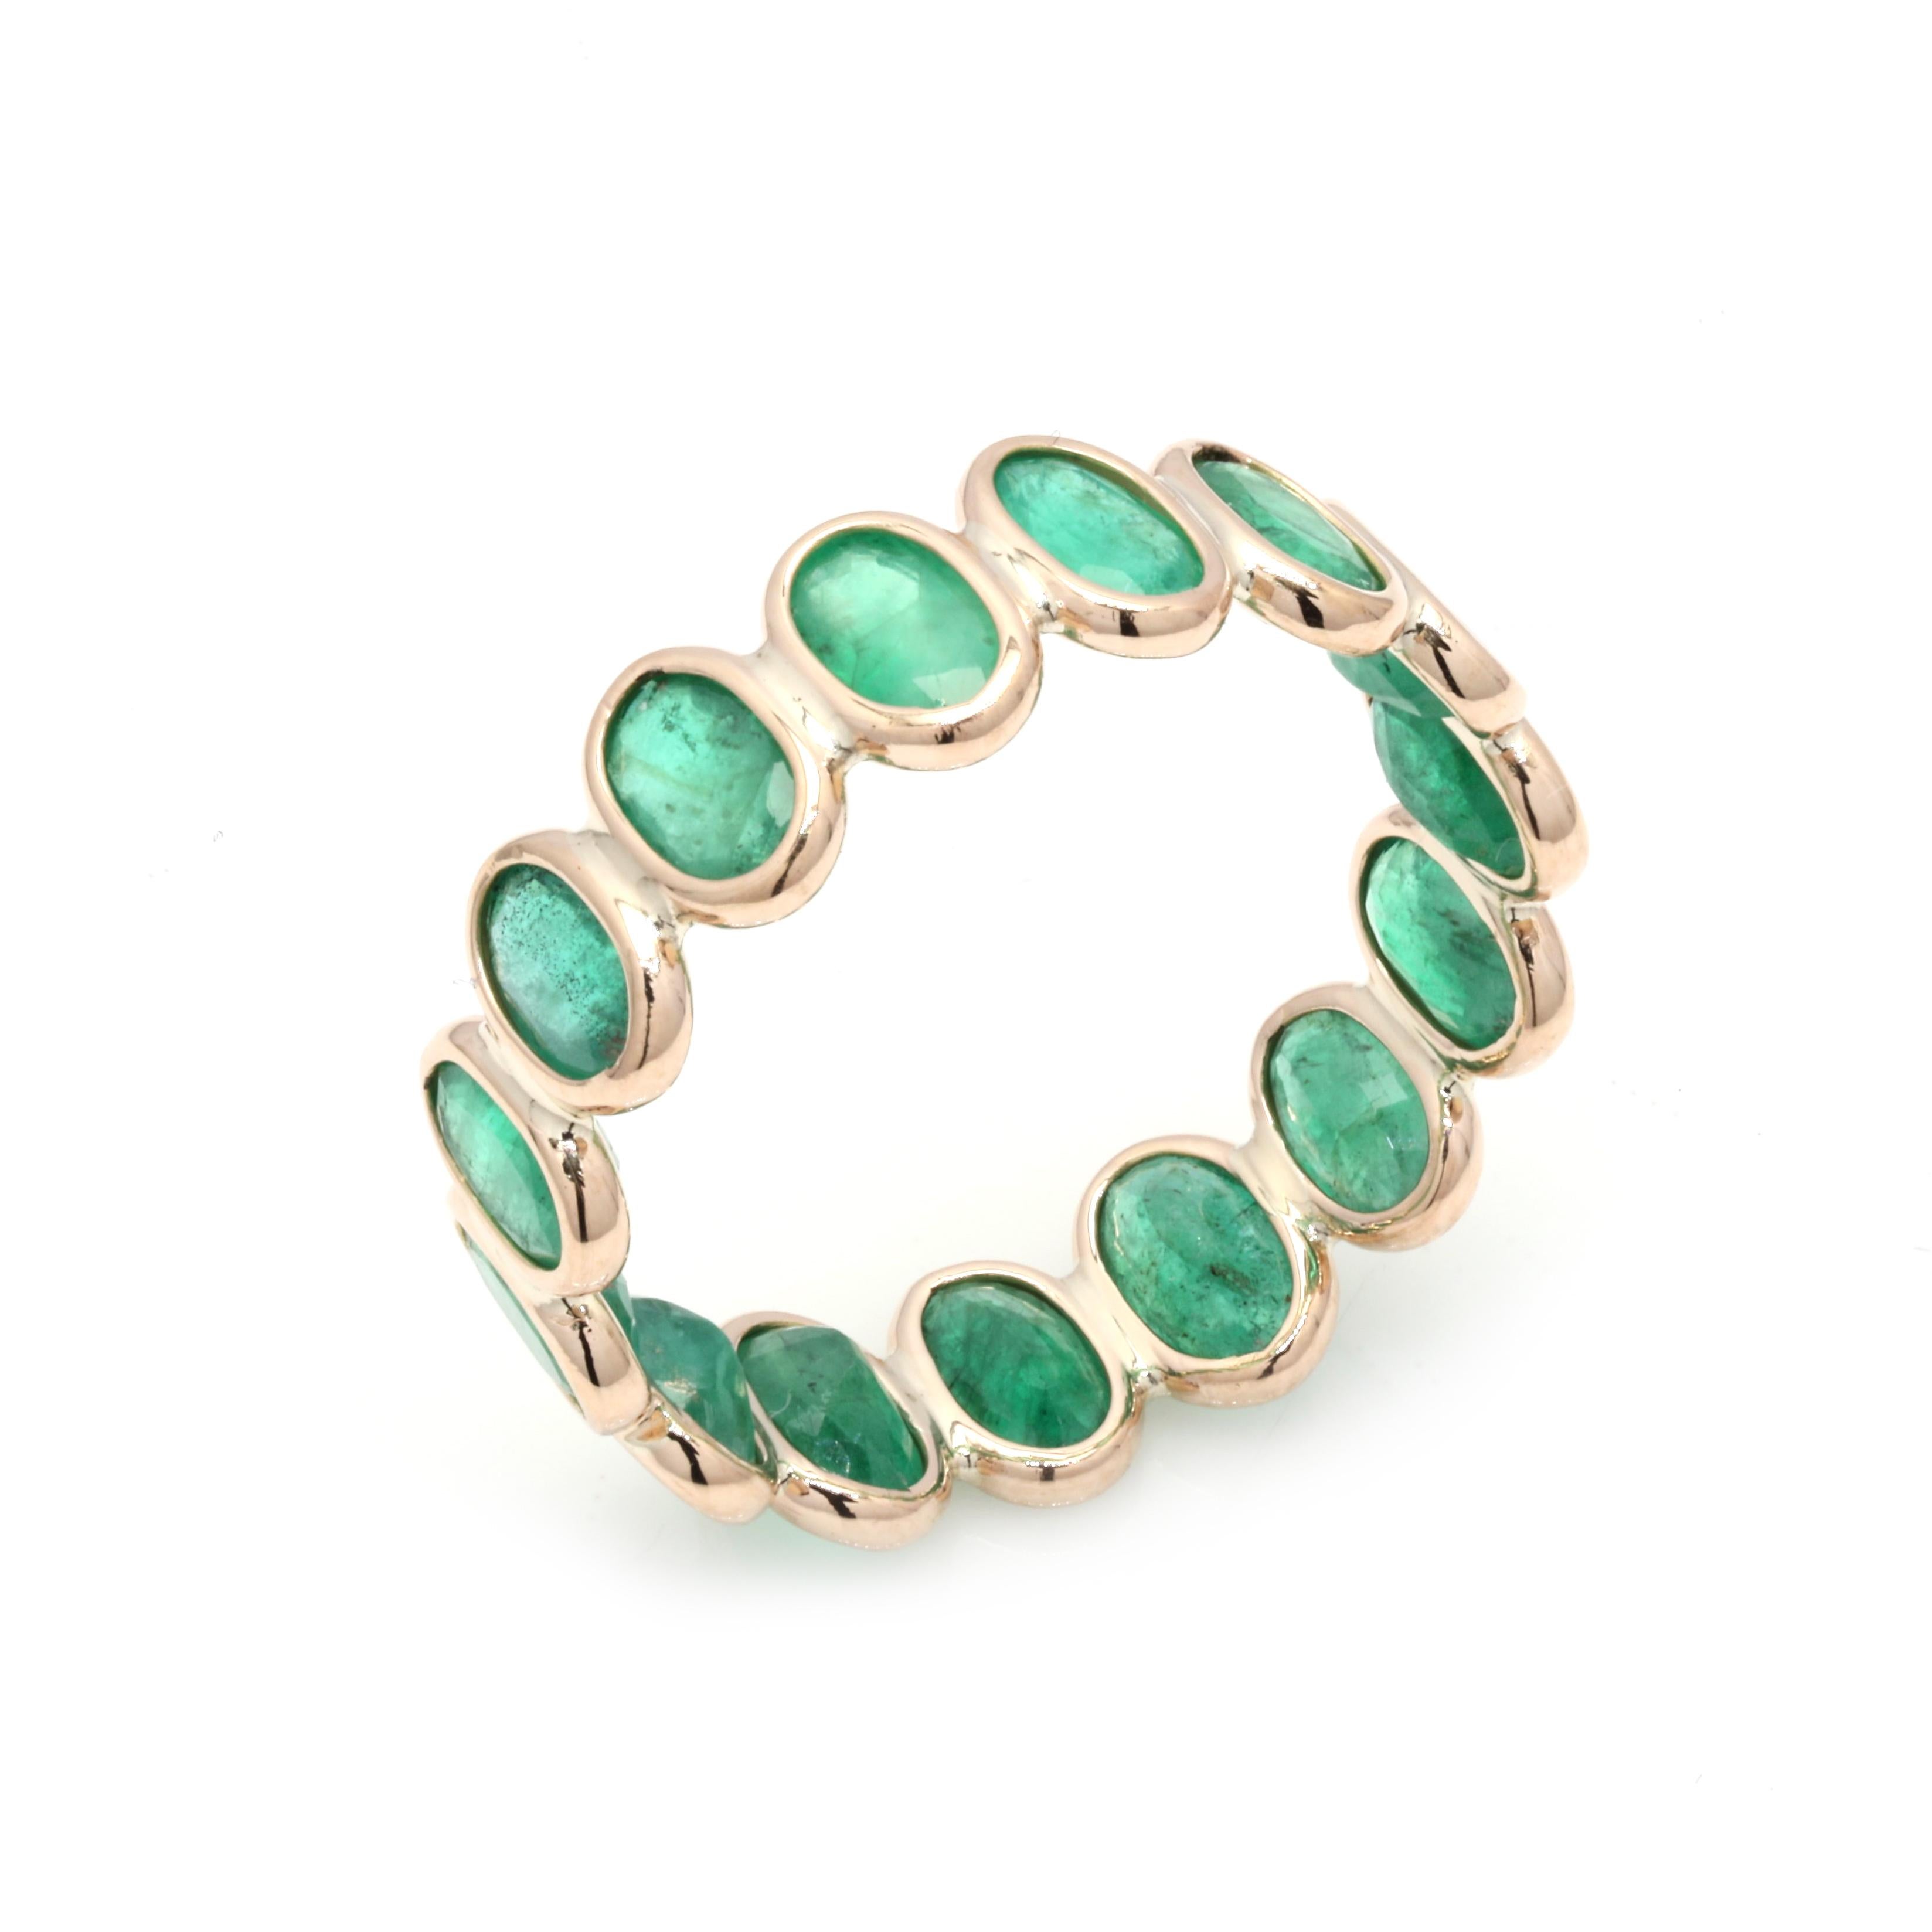 For Sale:  14 Karat Yellow Gold Eternity Ring with 3.41 Ct Oval Cut Natural Emerald 2